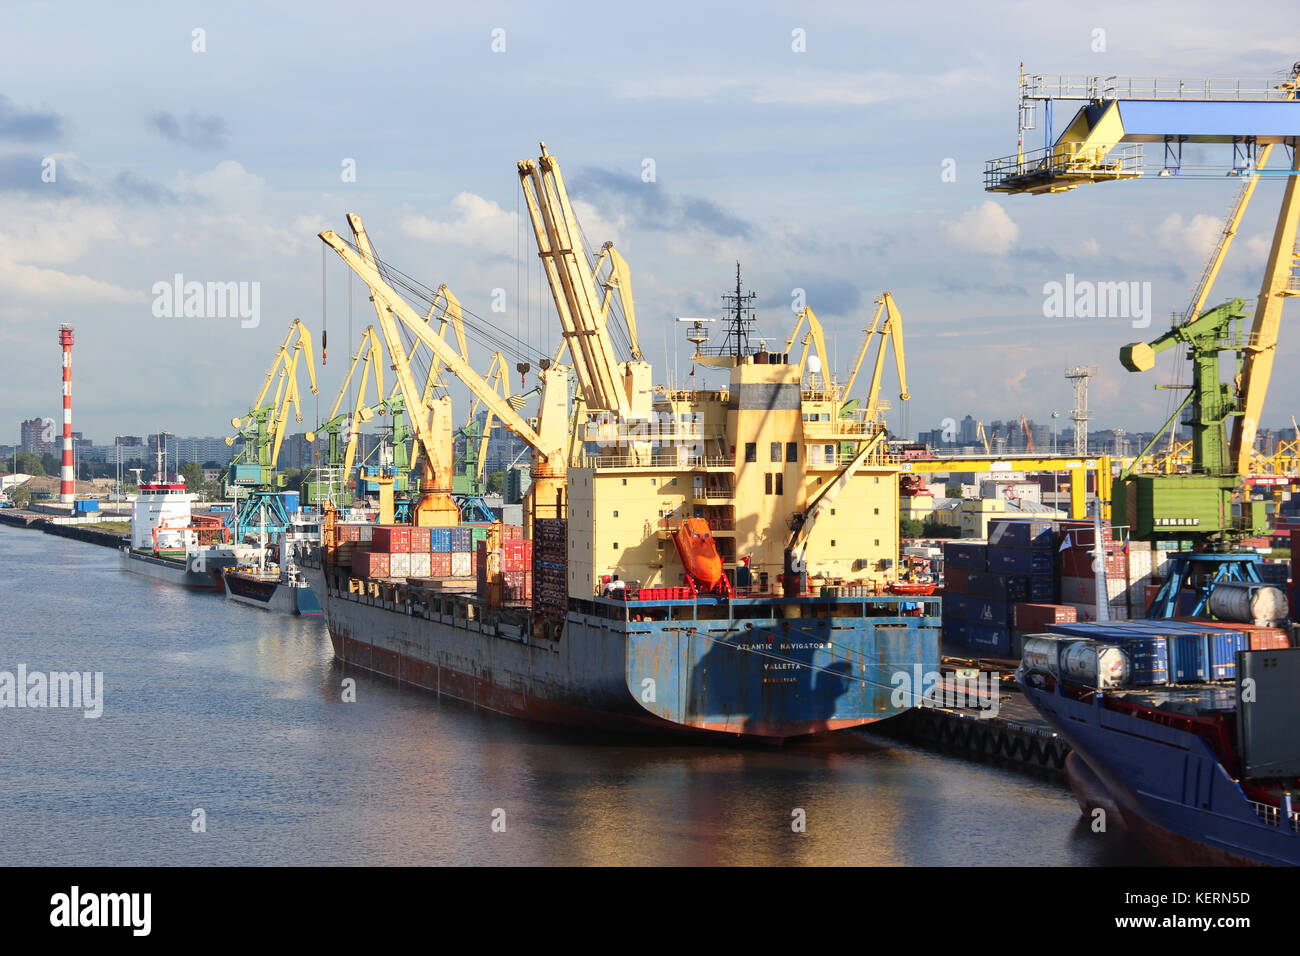 The cargo port. Containers with goods are loaded / unloaded on a commercial vessel using a crane in the harbor of the city. Summer. Business Stock Photo